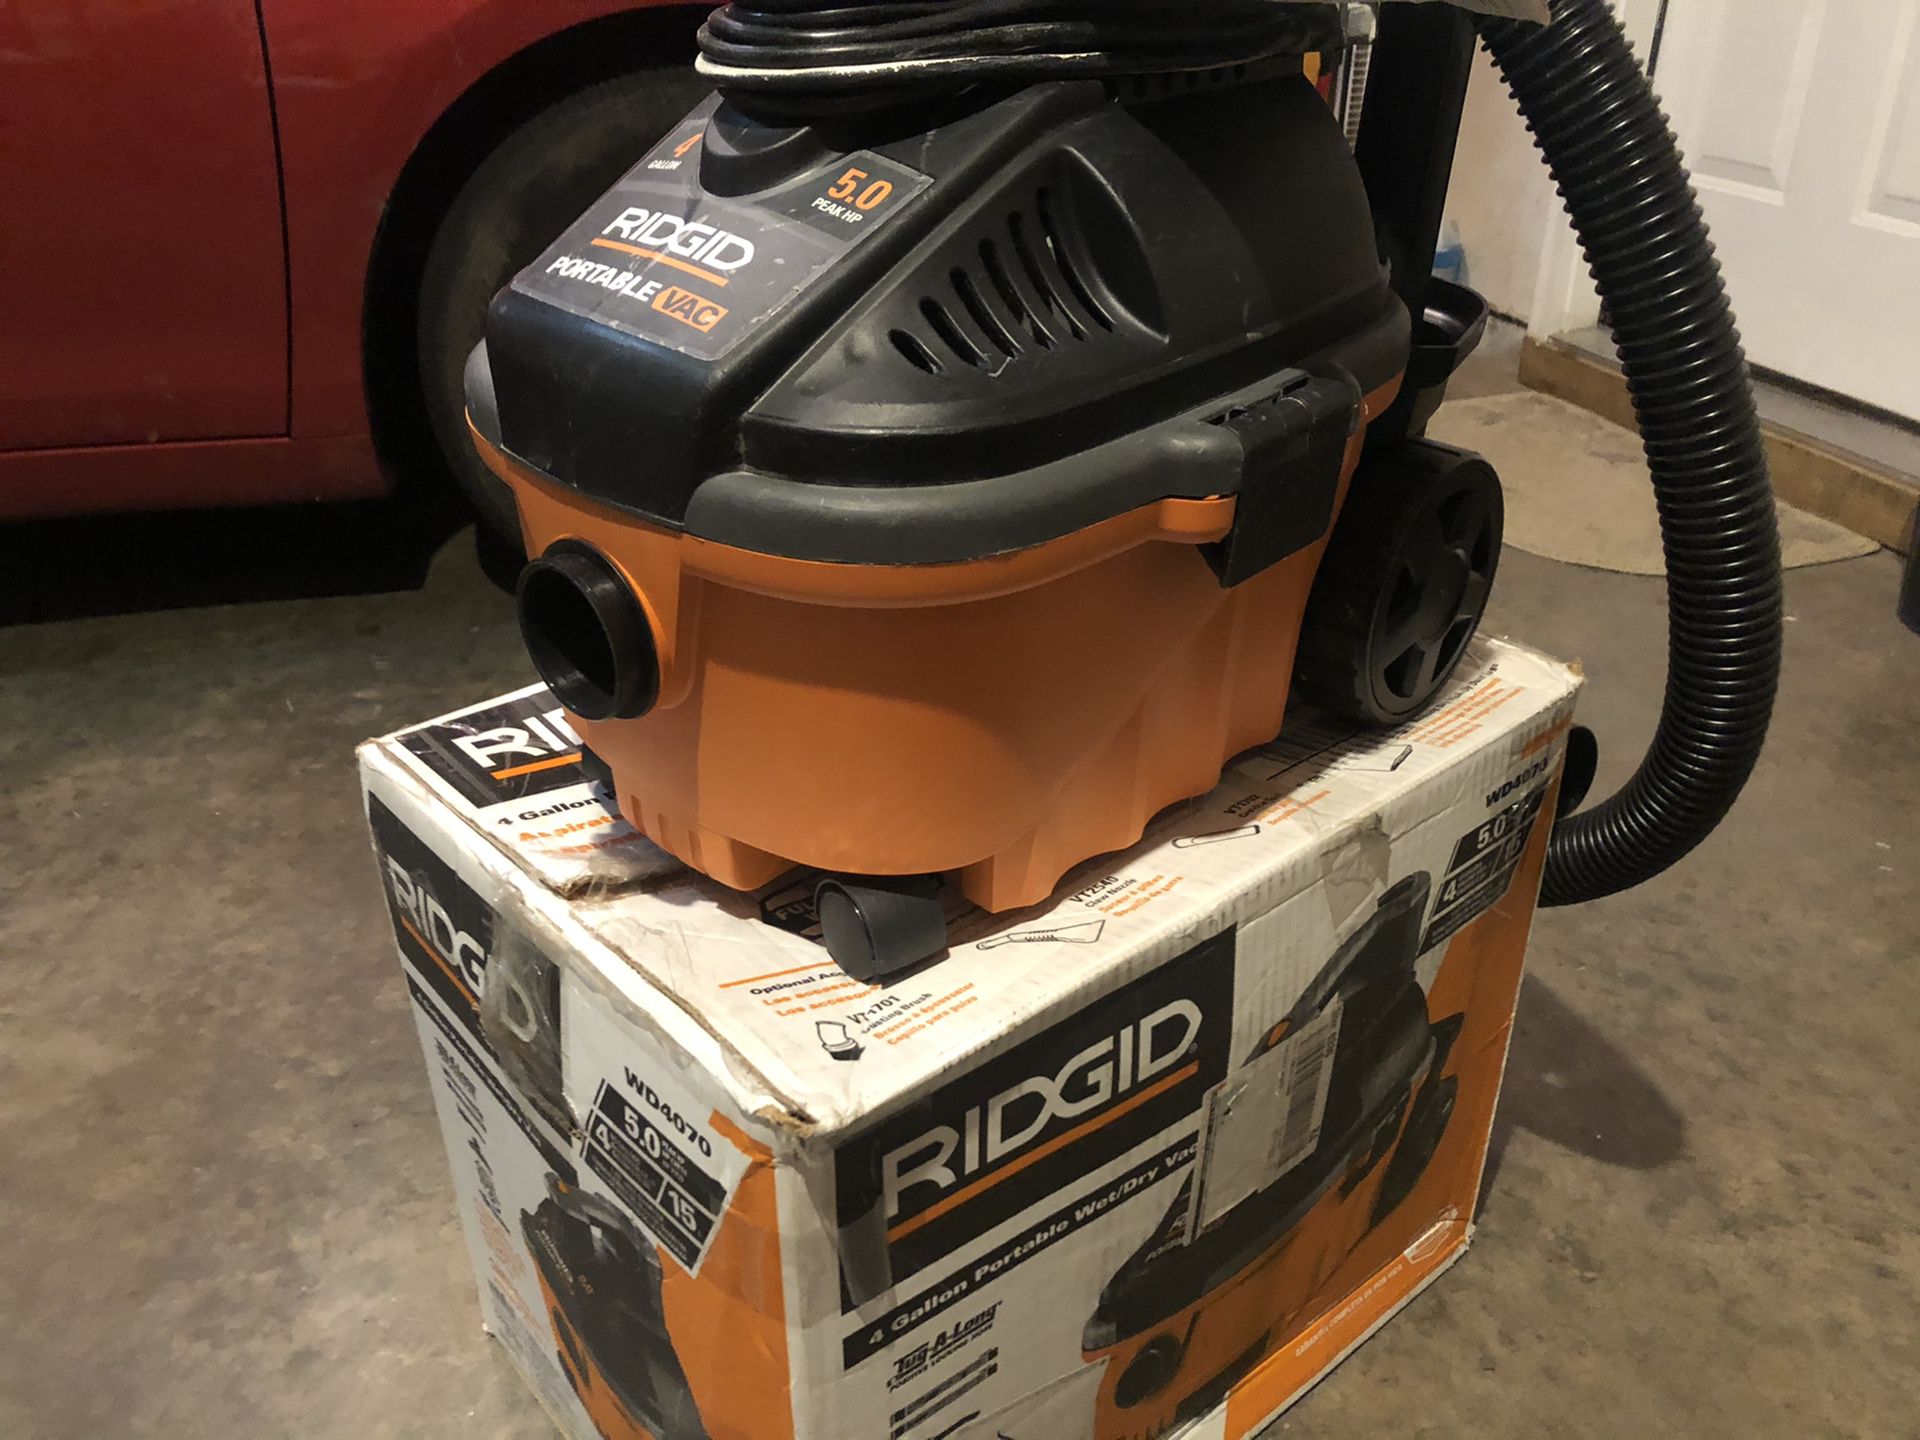 RIDGID 4 Gal. 5.0-Peak HP Portable Wet/Dry Shop Vacuum with Fine Dust Filter, Hose and Accessories